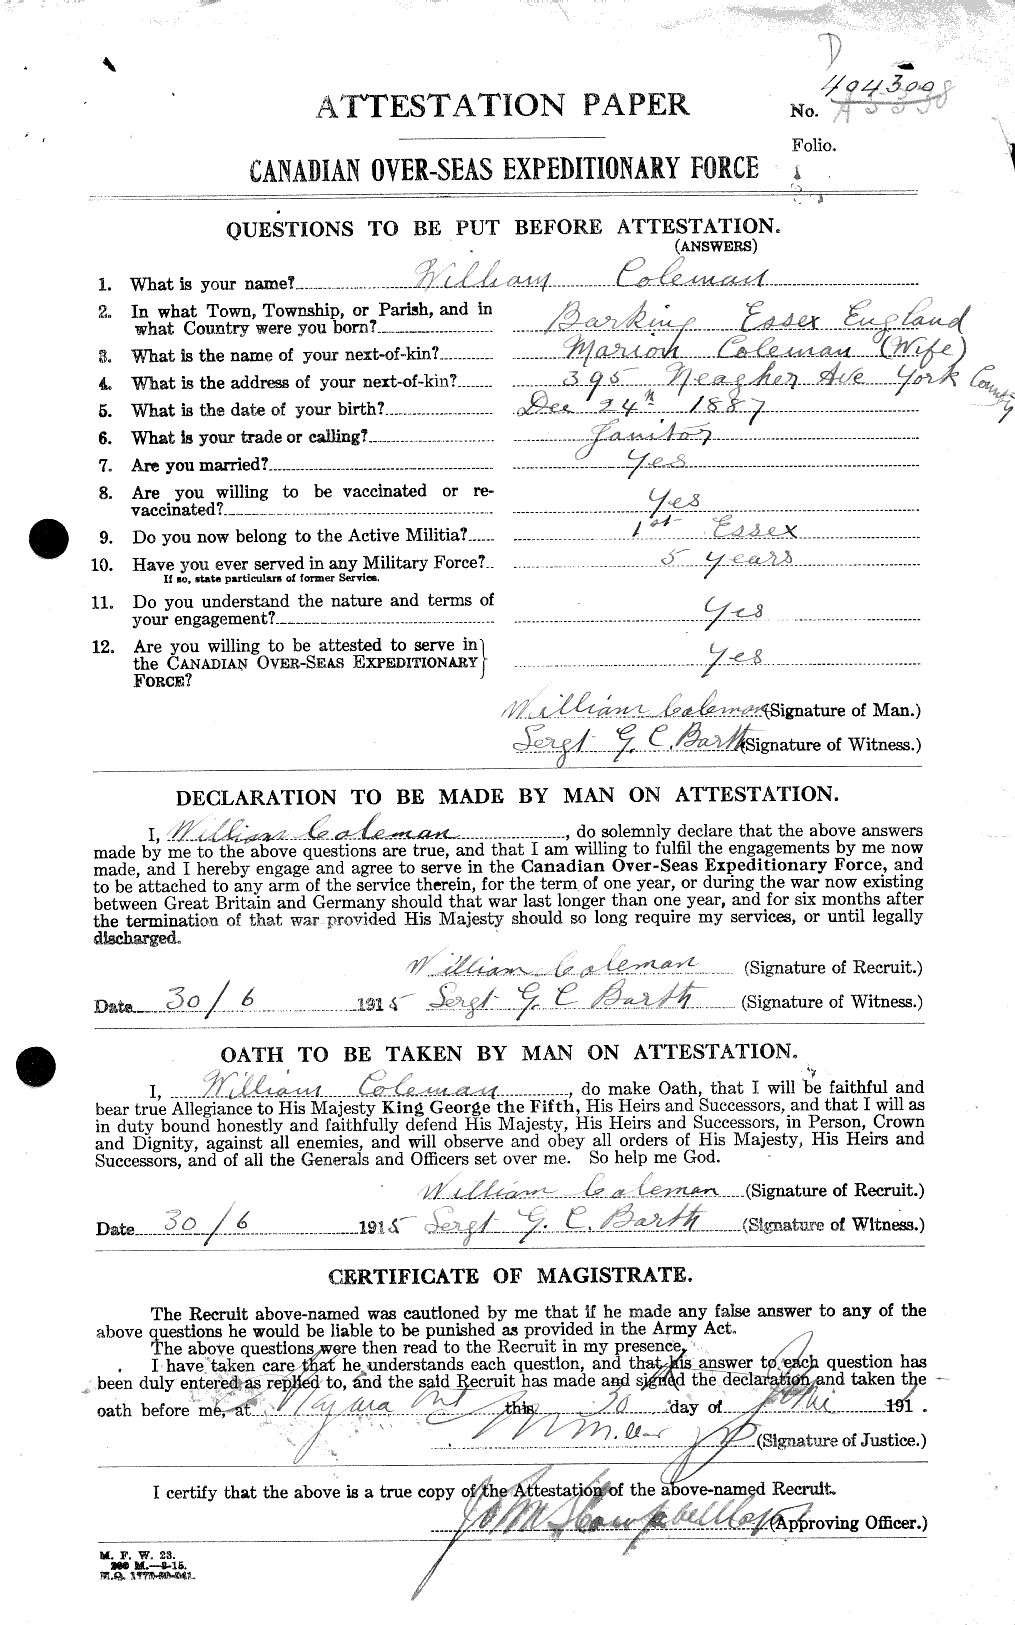 Personnel Records of the First World War - CEF 028295a